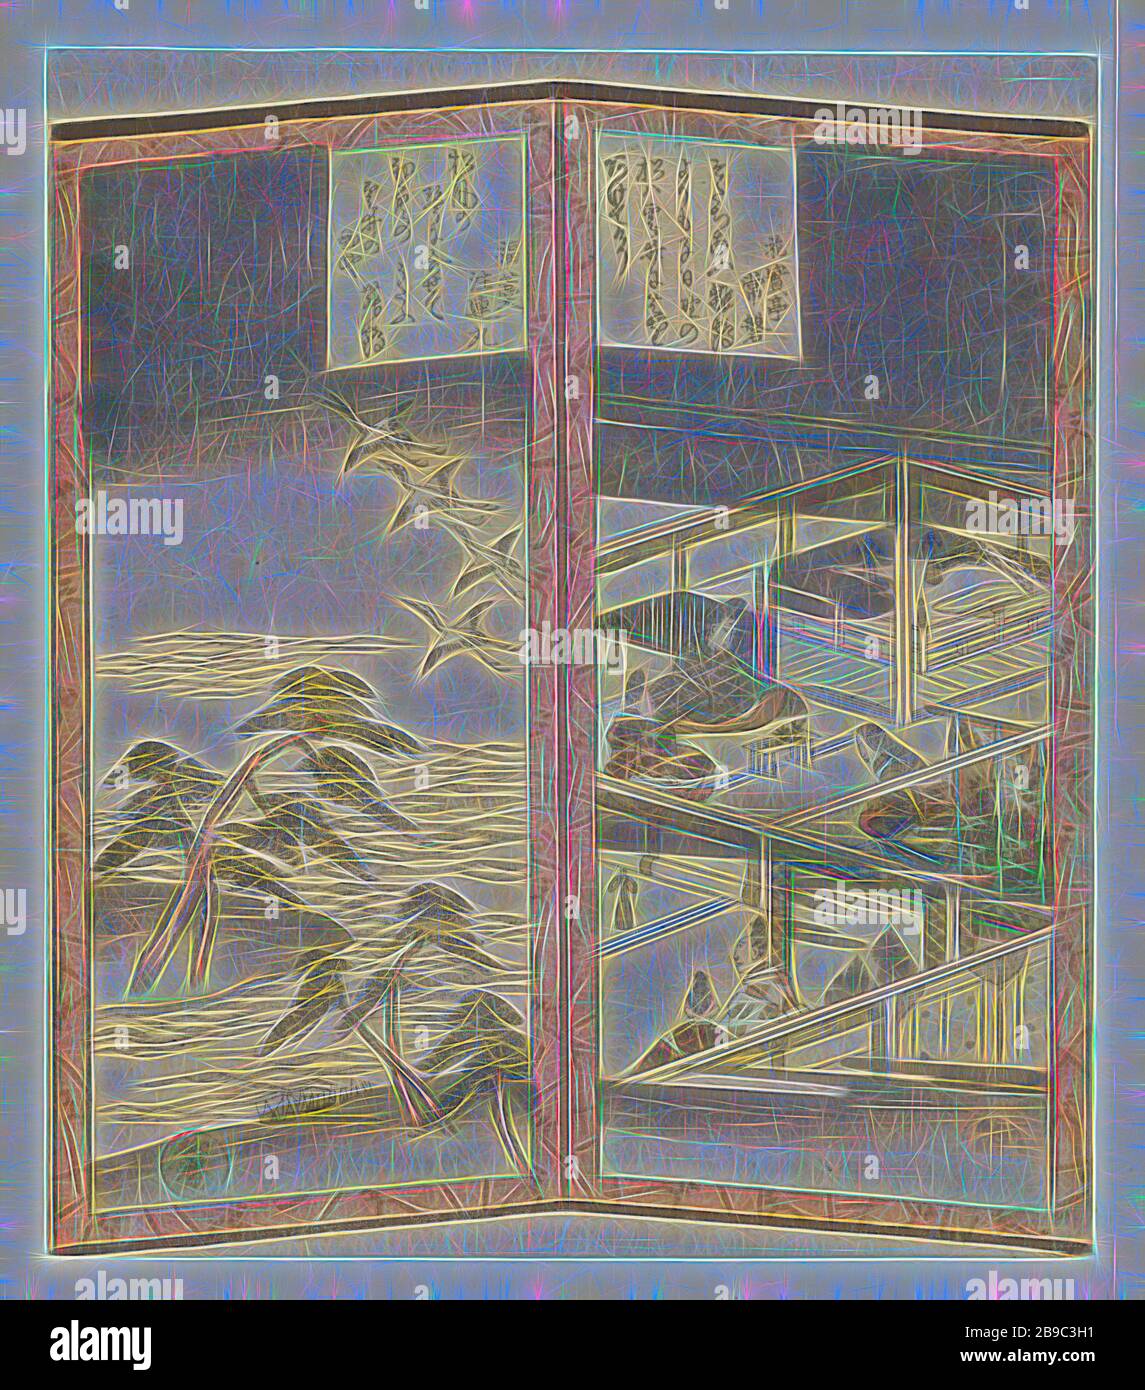 Interior of a palace next to the beach A set of folding screens (series title), Two parts of a miniature folding screen. View of a palace with courtiers and on the left a beach with pine trees and flying cranes. The courtiers in the palace surround a young pine tree, this was an old tradition on the first day of the new year and was probably originally a fertility ritual. With two poems, screen, folding screen, Ryûryûkyo Shinsai (mentioned on object), Japan, c. 1825, paper, colour woodcut, h 210 mm × w 183 mm, Reimagined by Gibon, design of warm cheerful glowing of brightness and light rays ra Stock Photo